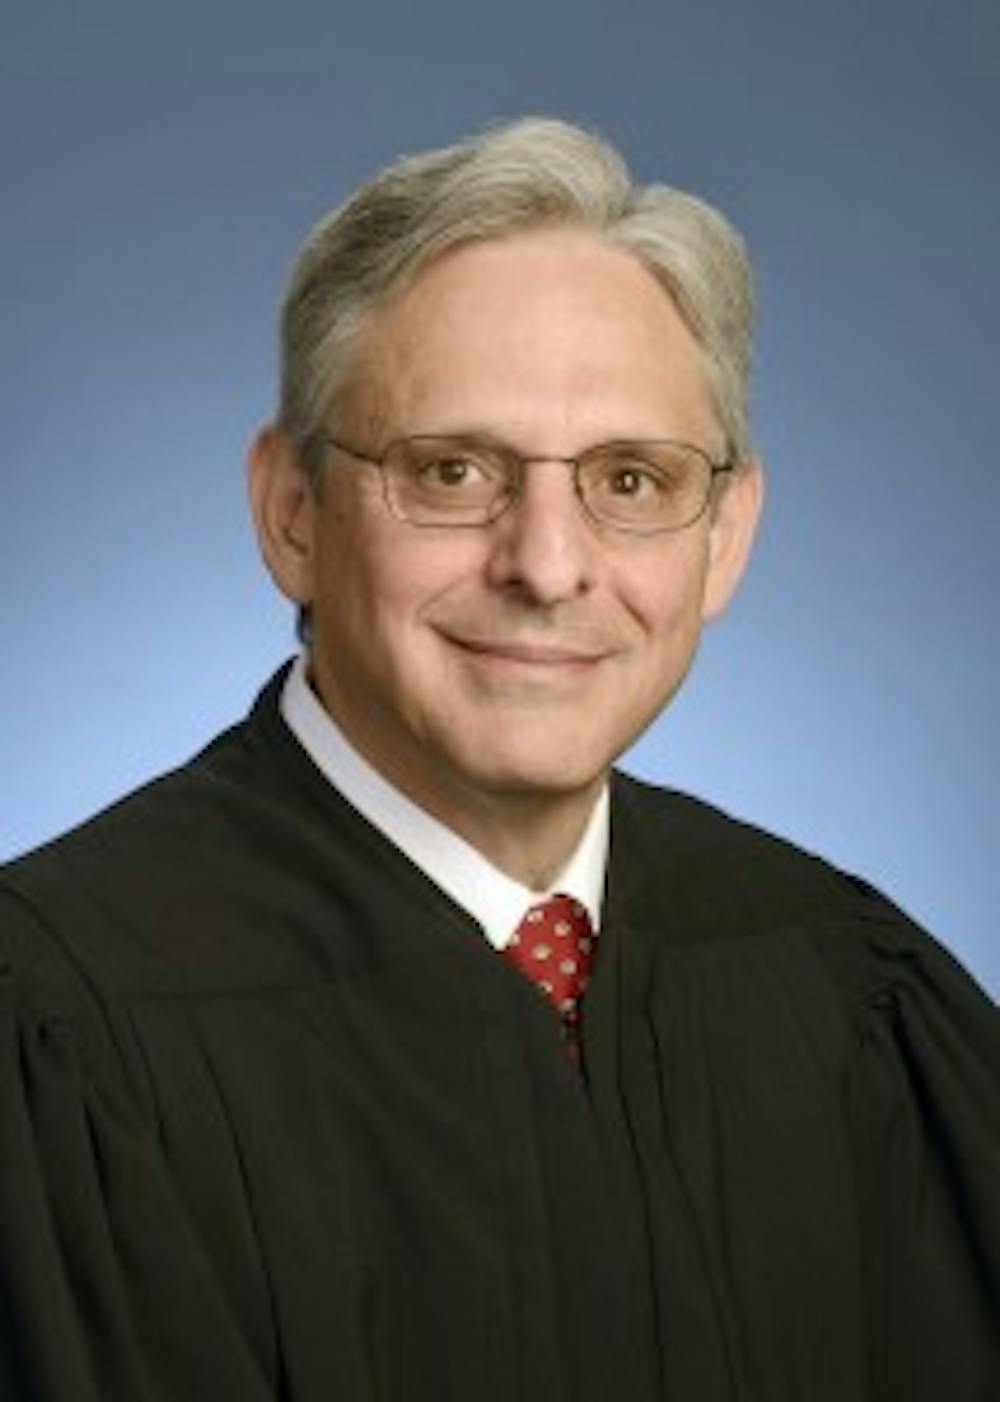 President Barack Obama named federal judge Merrick Garland to the U.S. Supreme Court Wednesday, praising the jurist&nbsp;as a moderate who has earned the respect of members of both parties.